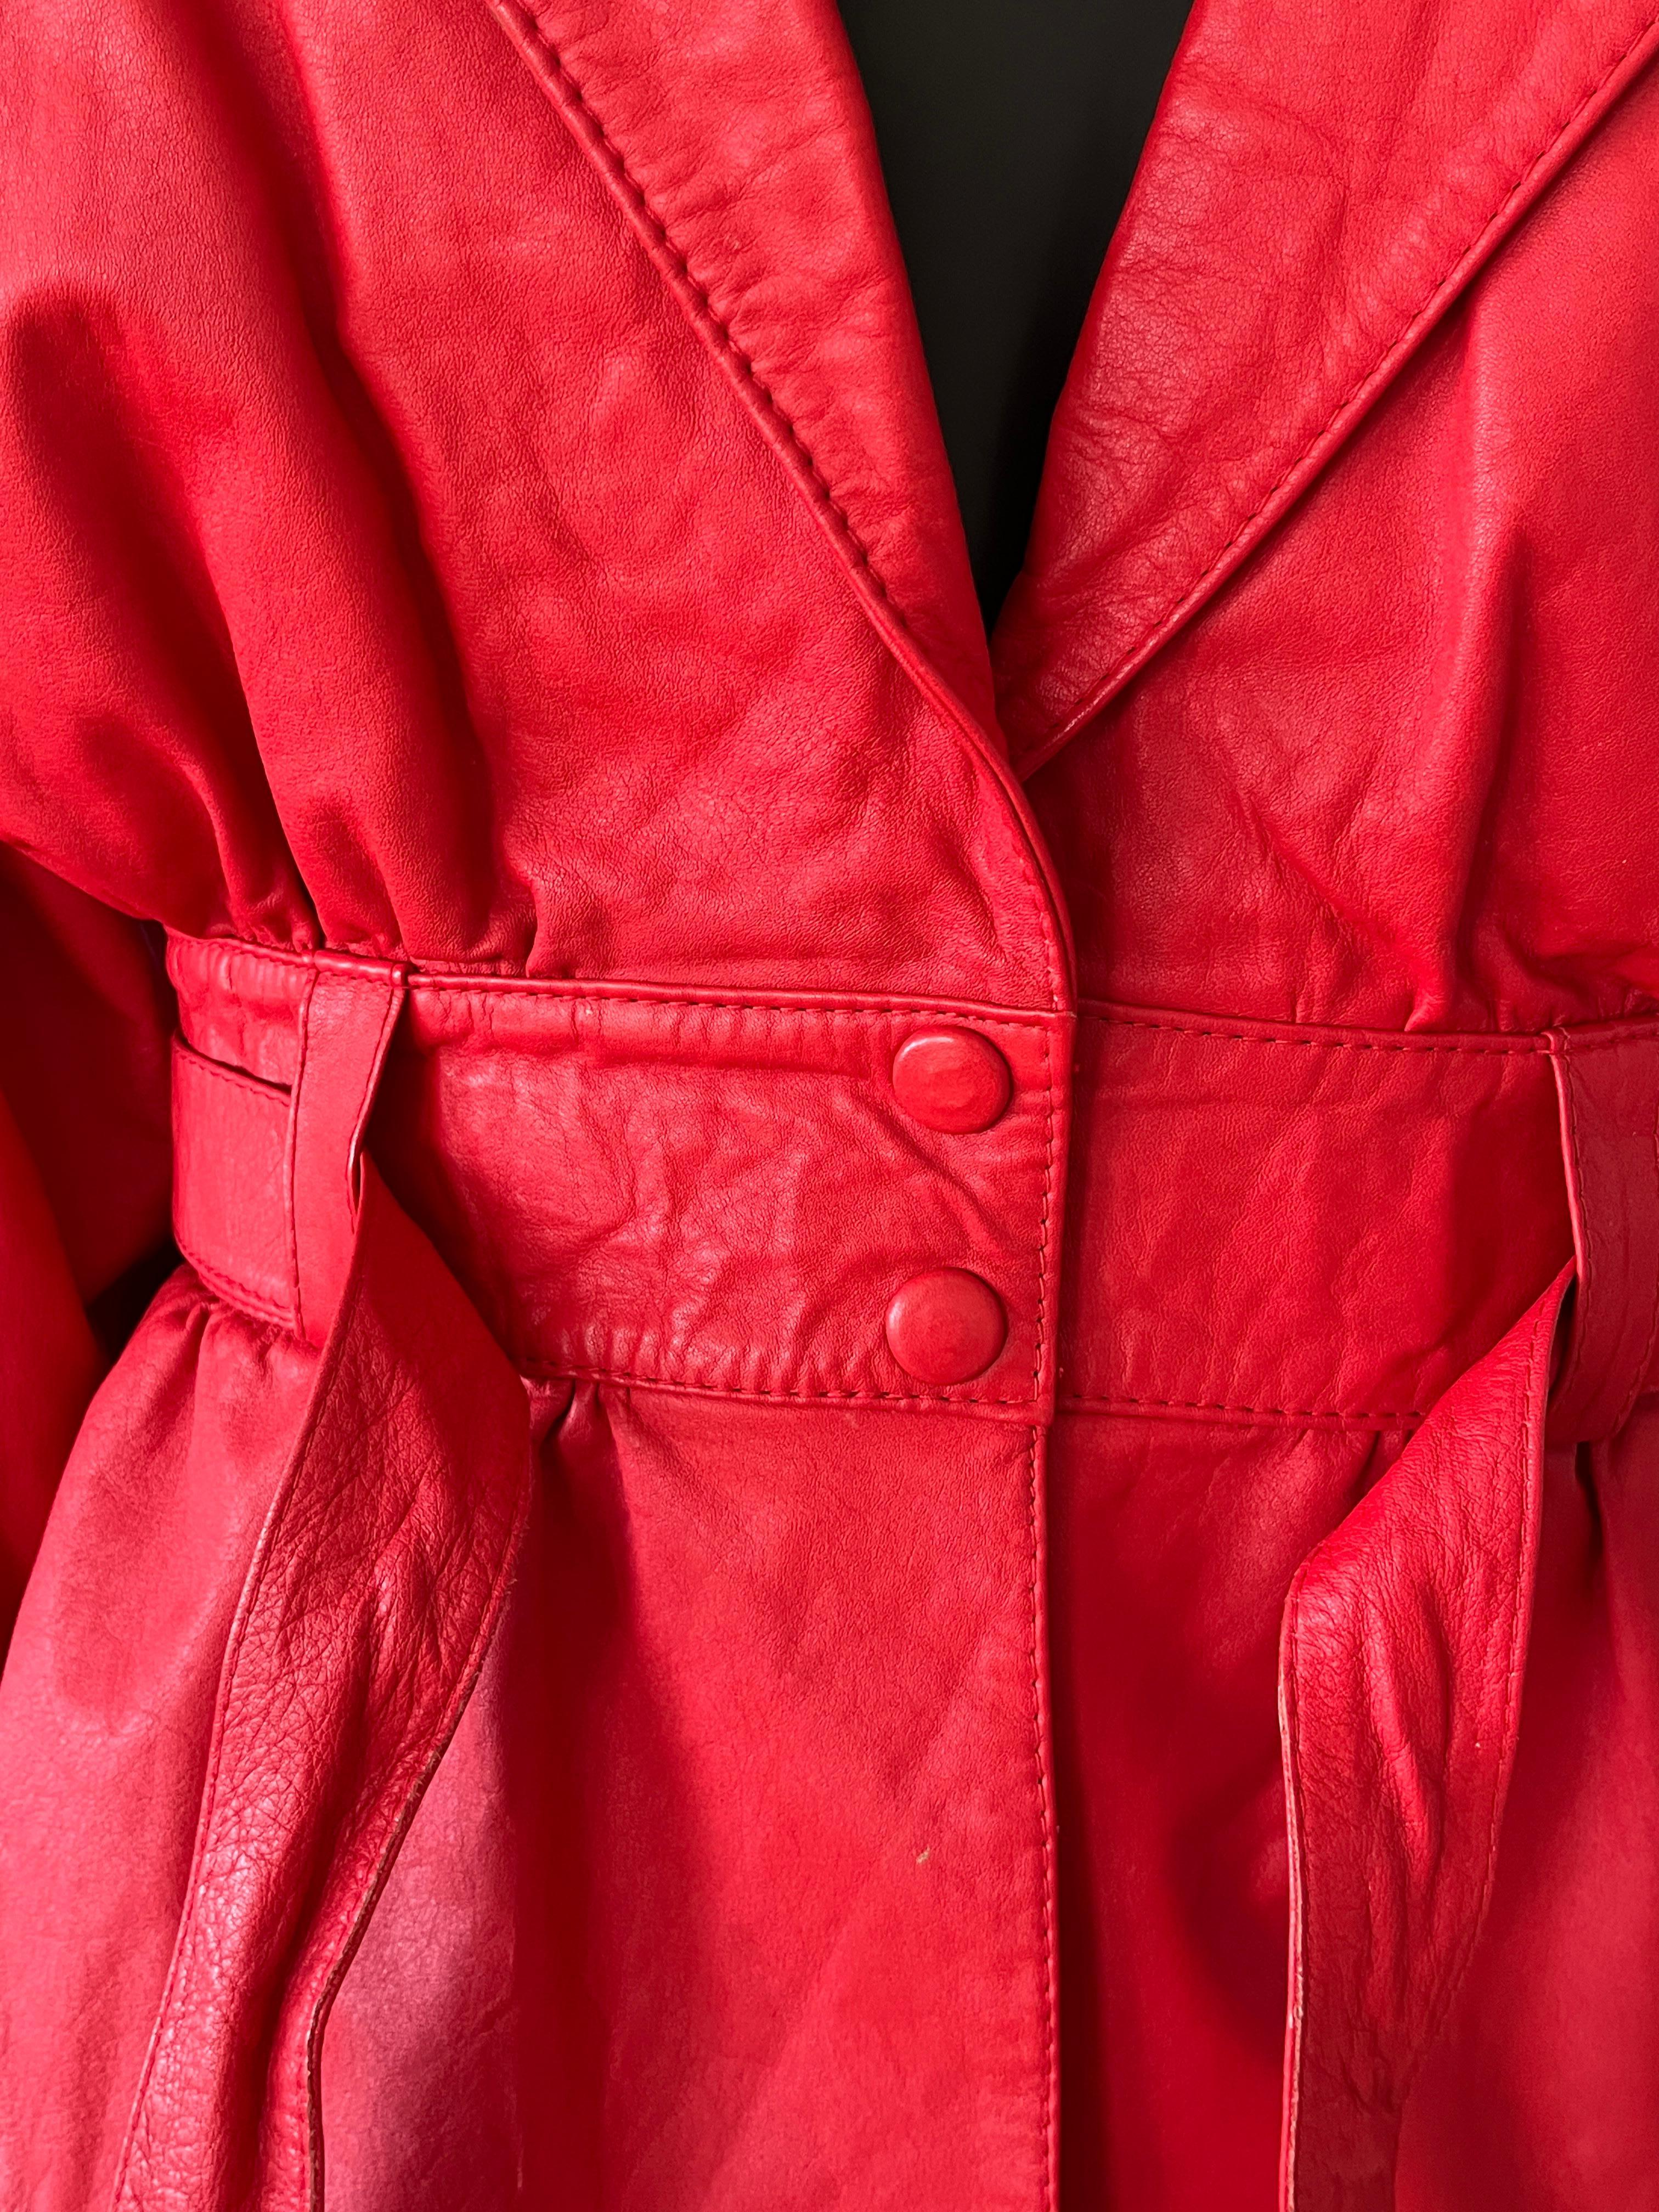 1980s Red Leather Jacket For Sale 7